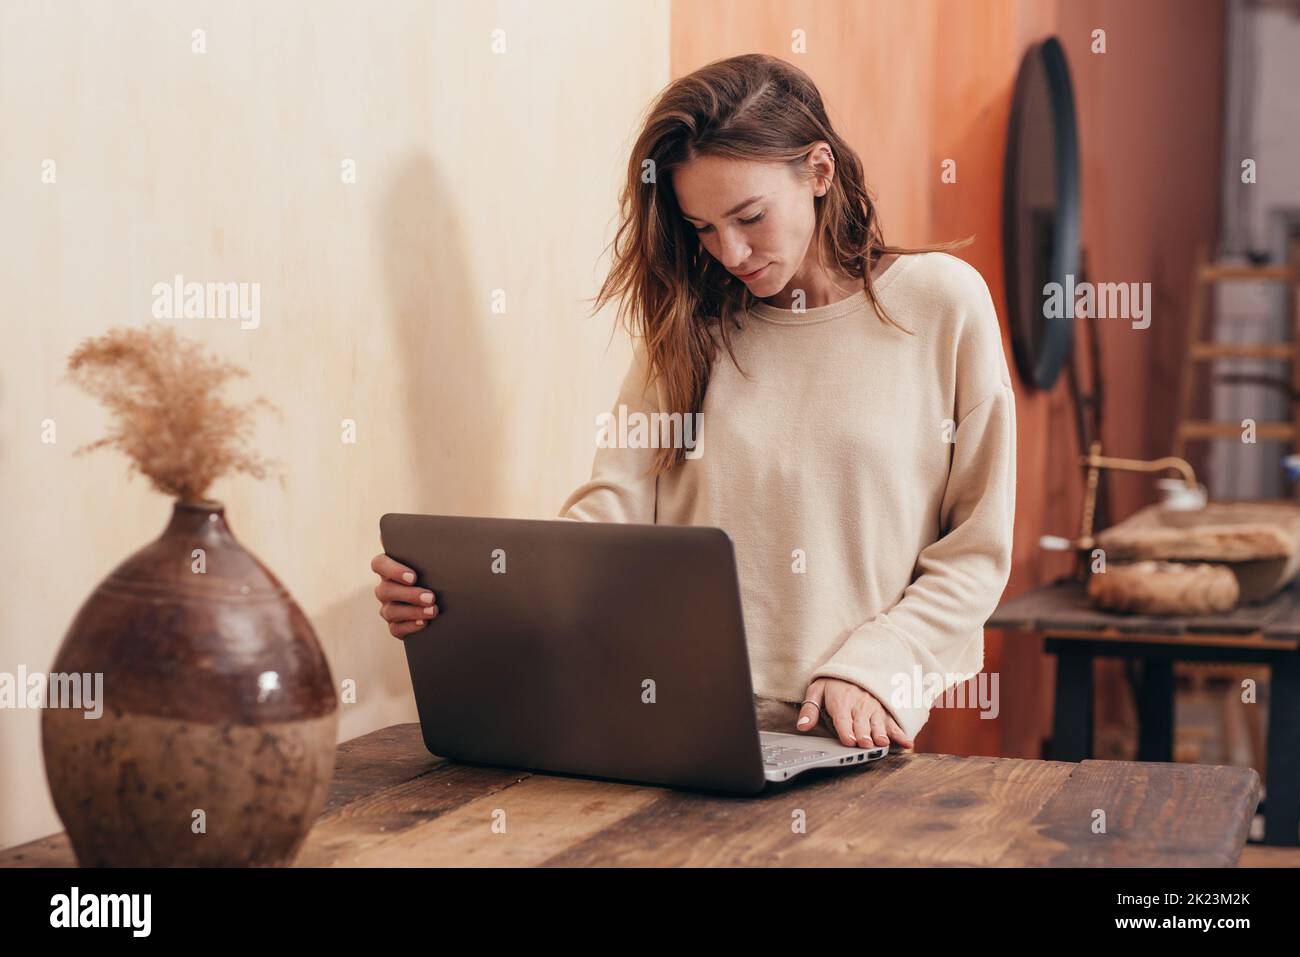 Young woman standing at desk with laptop computer. Stock Photo